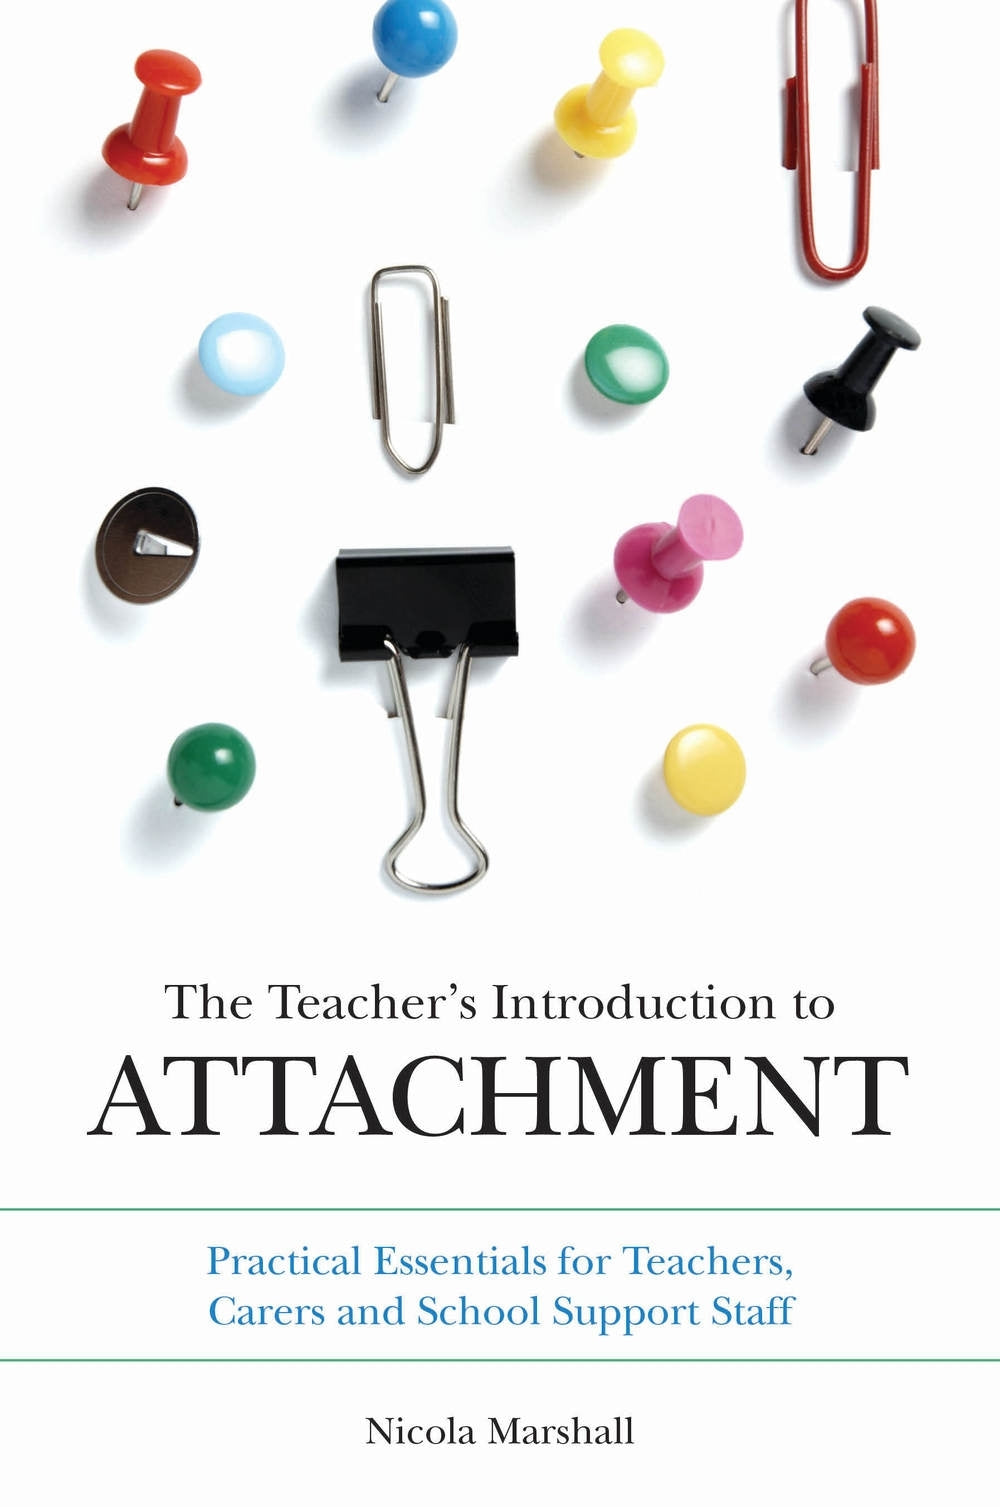 The Teacher's Introduction to Attachment by Nicola Marshall, Phil Thomas